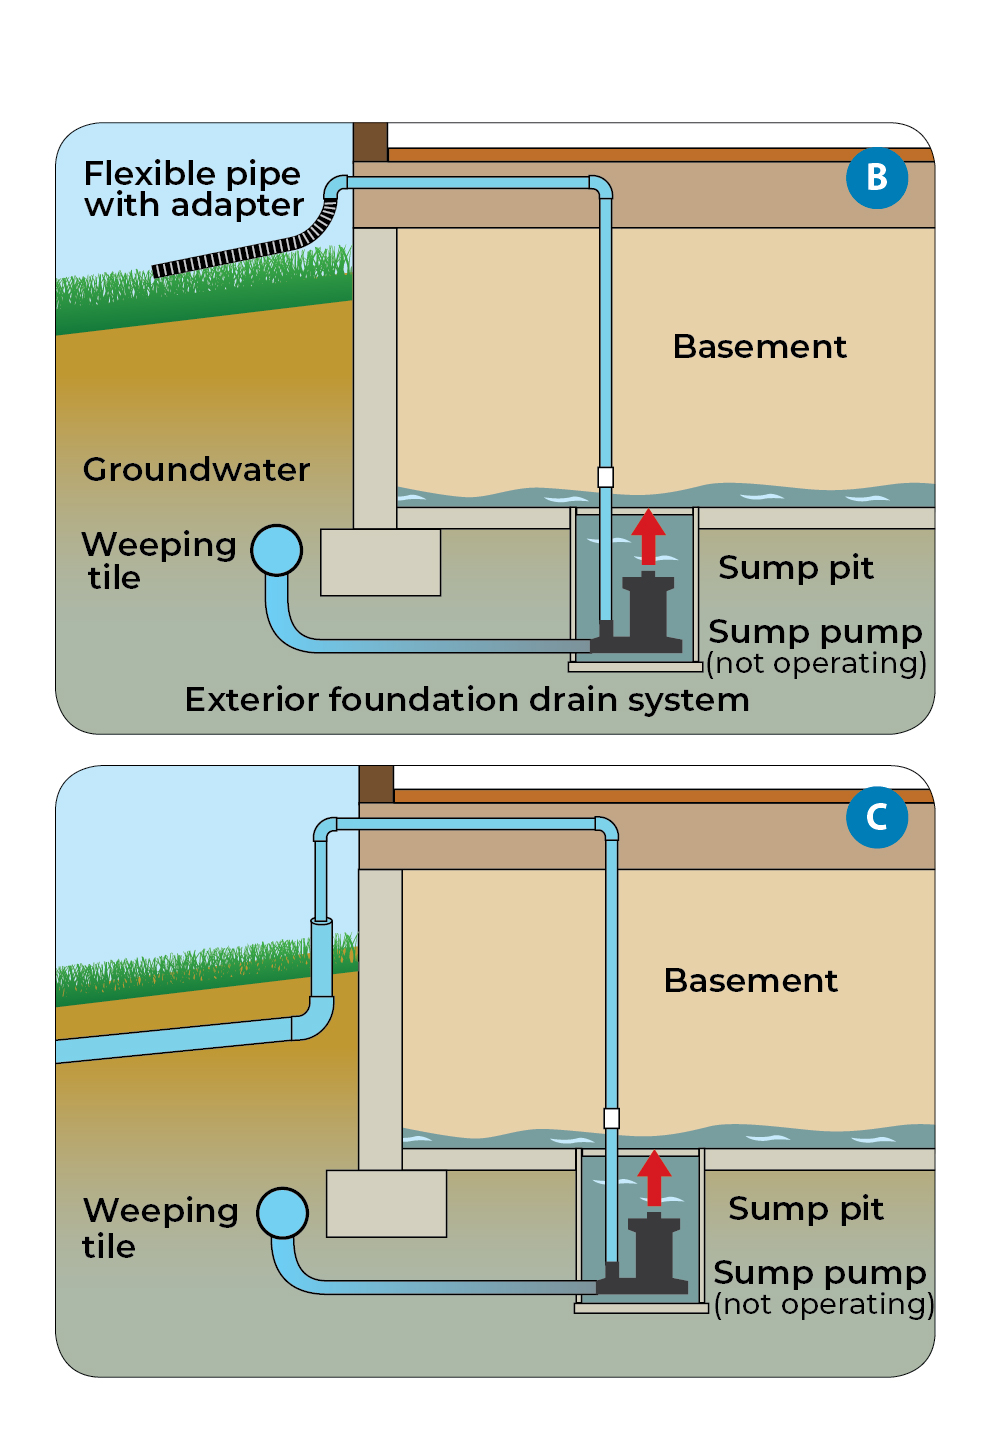 Diagram B: Diagram of flooded basement caused by malfunctioning sump pump with weeping tiles connected to the sump pit. Sump discharge going from inside the house and draining to the ground surface outside of the house; Diagram C: Diagram of flooded basement caused by malfunctioning sump pump with weeping tiles connected to the sump pit. Sump discharge going from inside the house and draining directly into the storm sewer. 